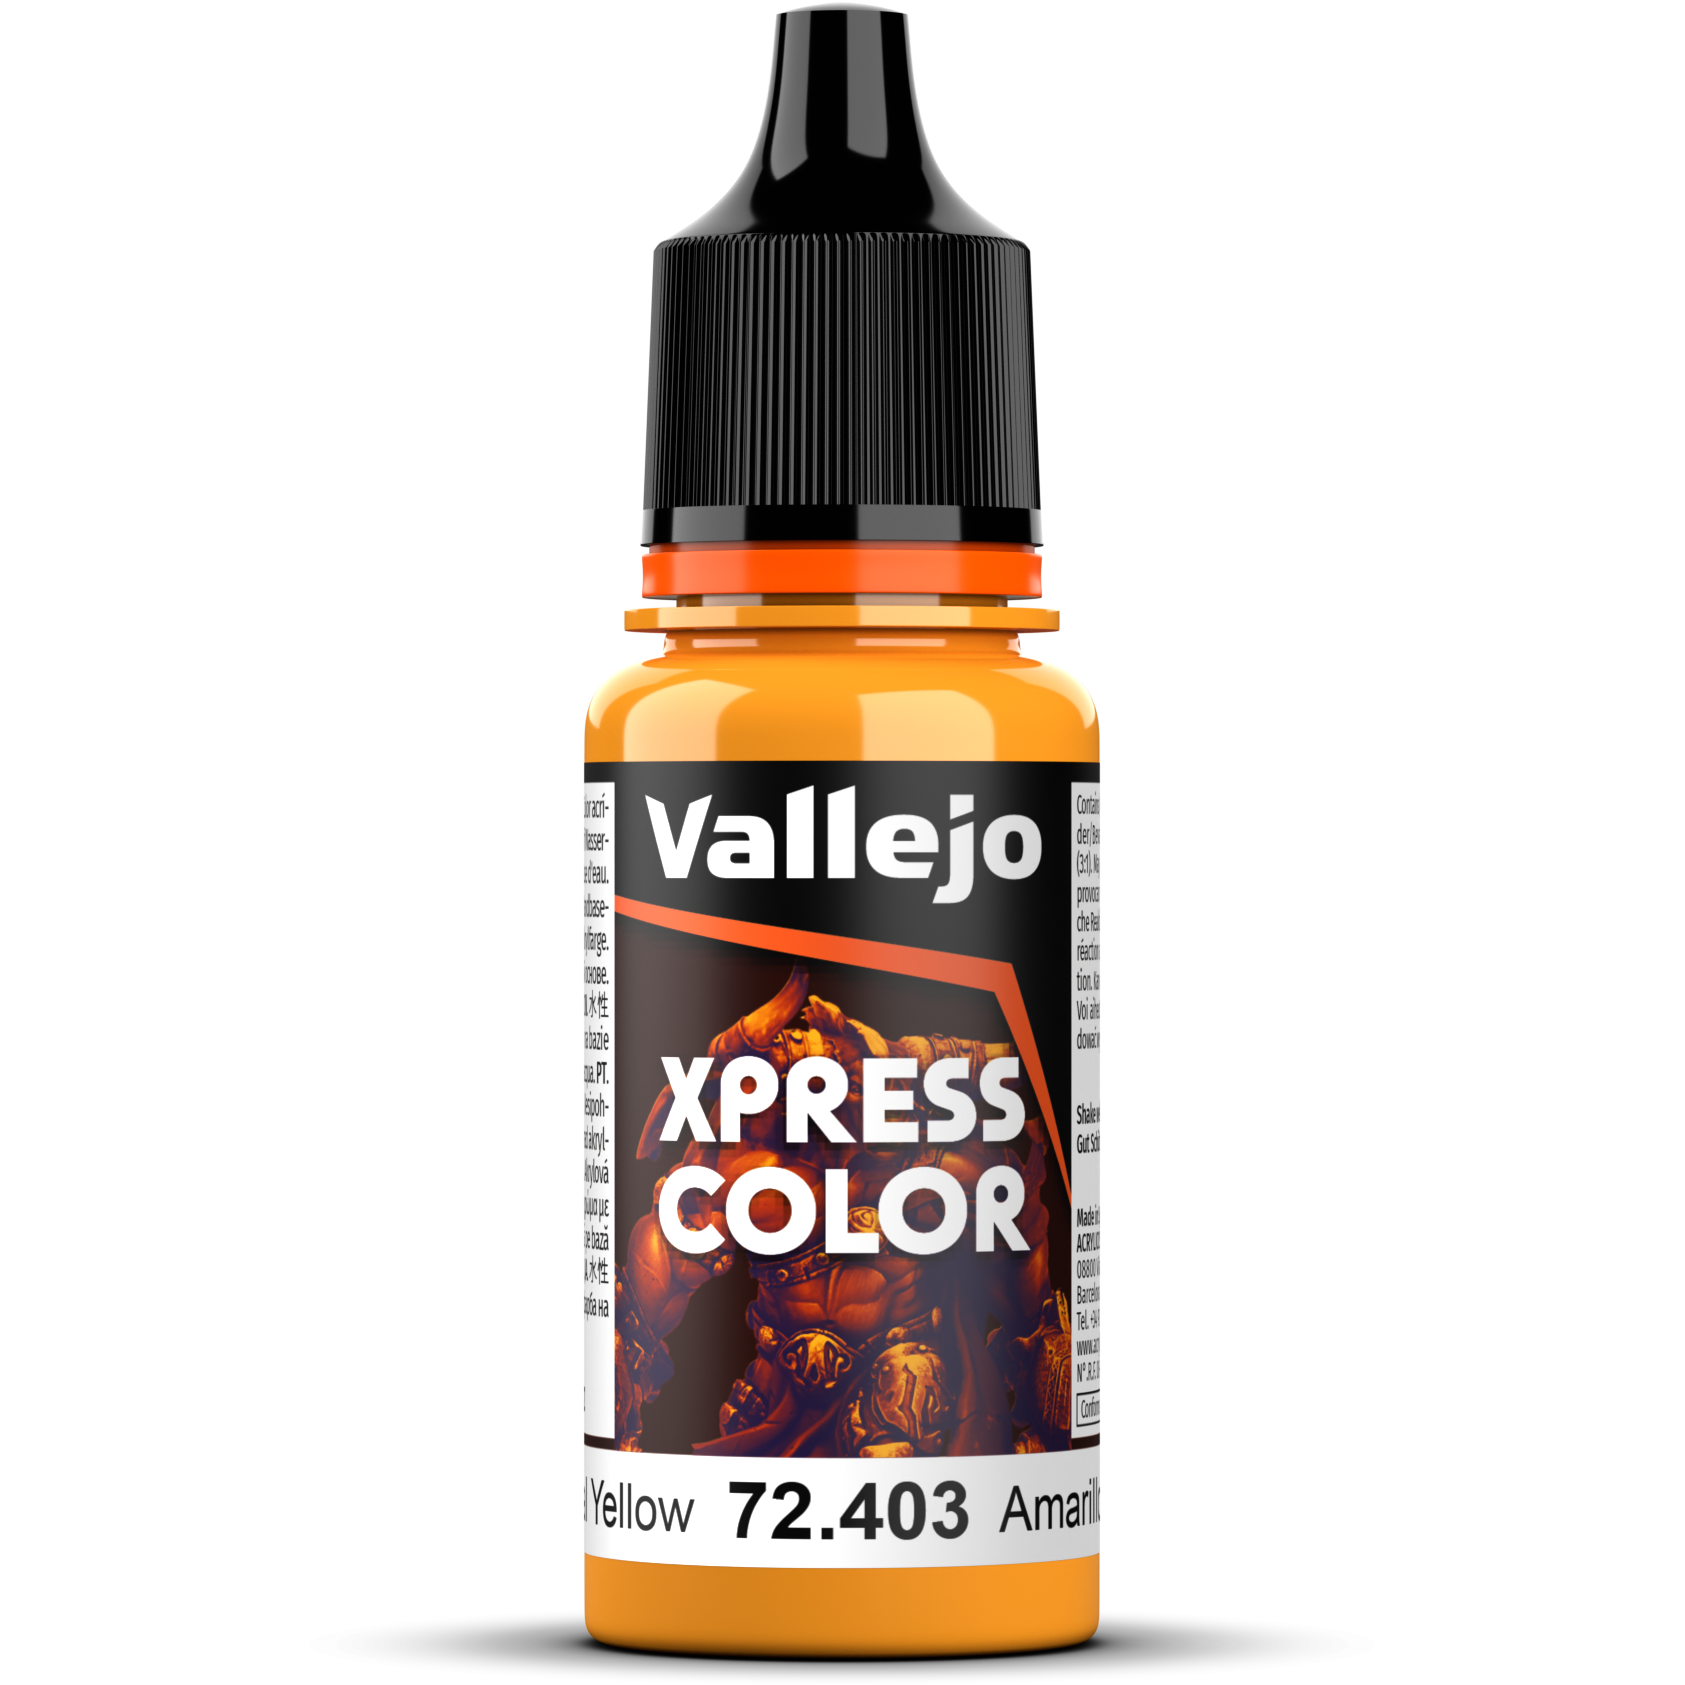 Vallejo Xpress Color - Assorted